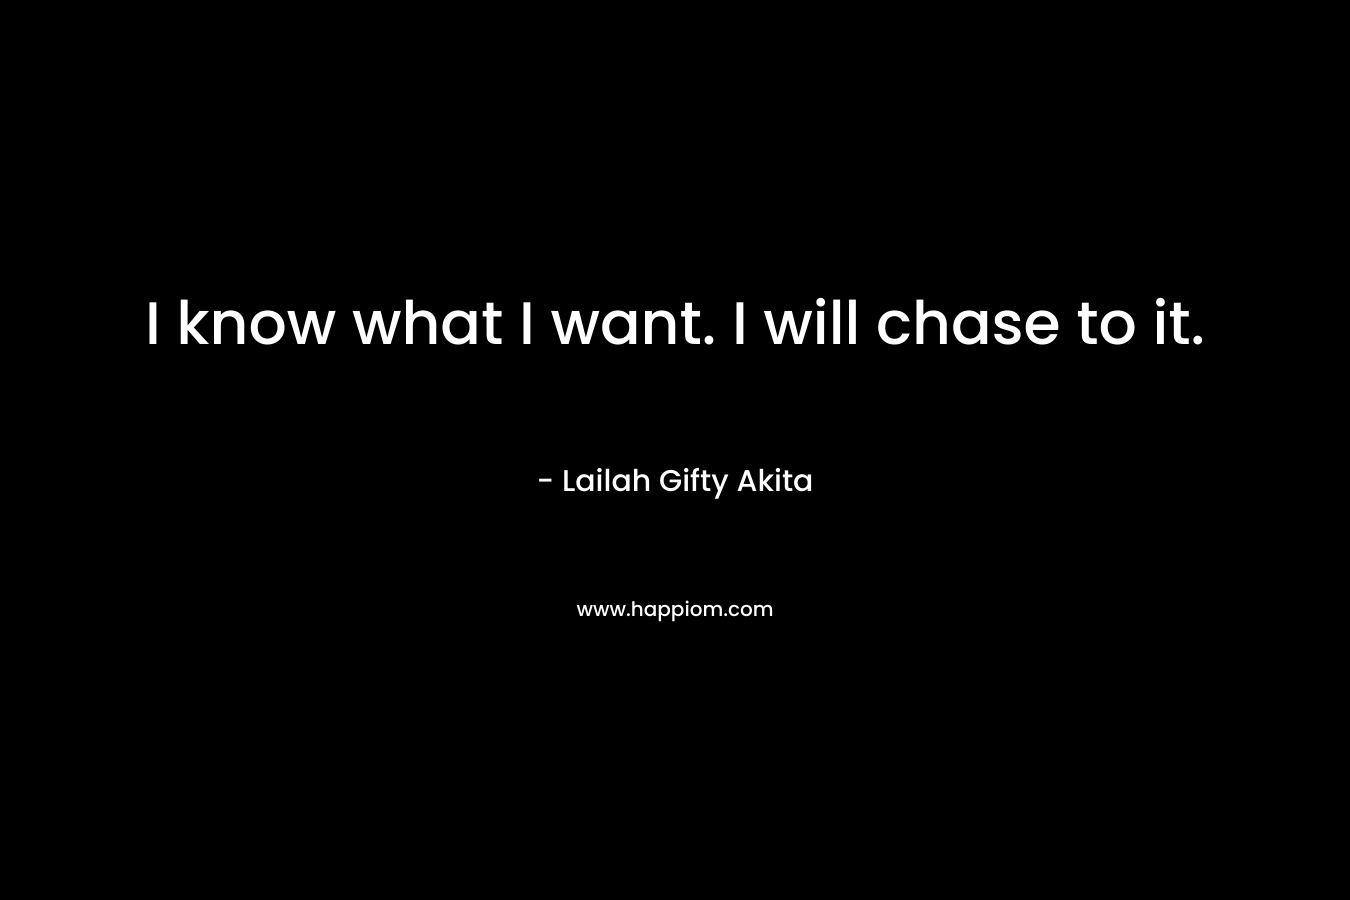 I know what I want. I will chase to it.